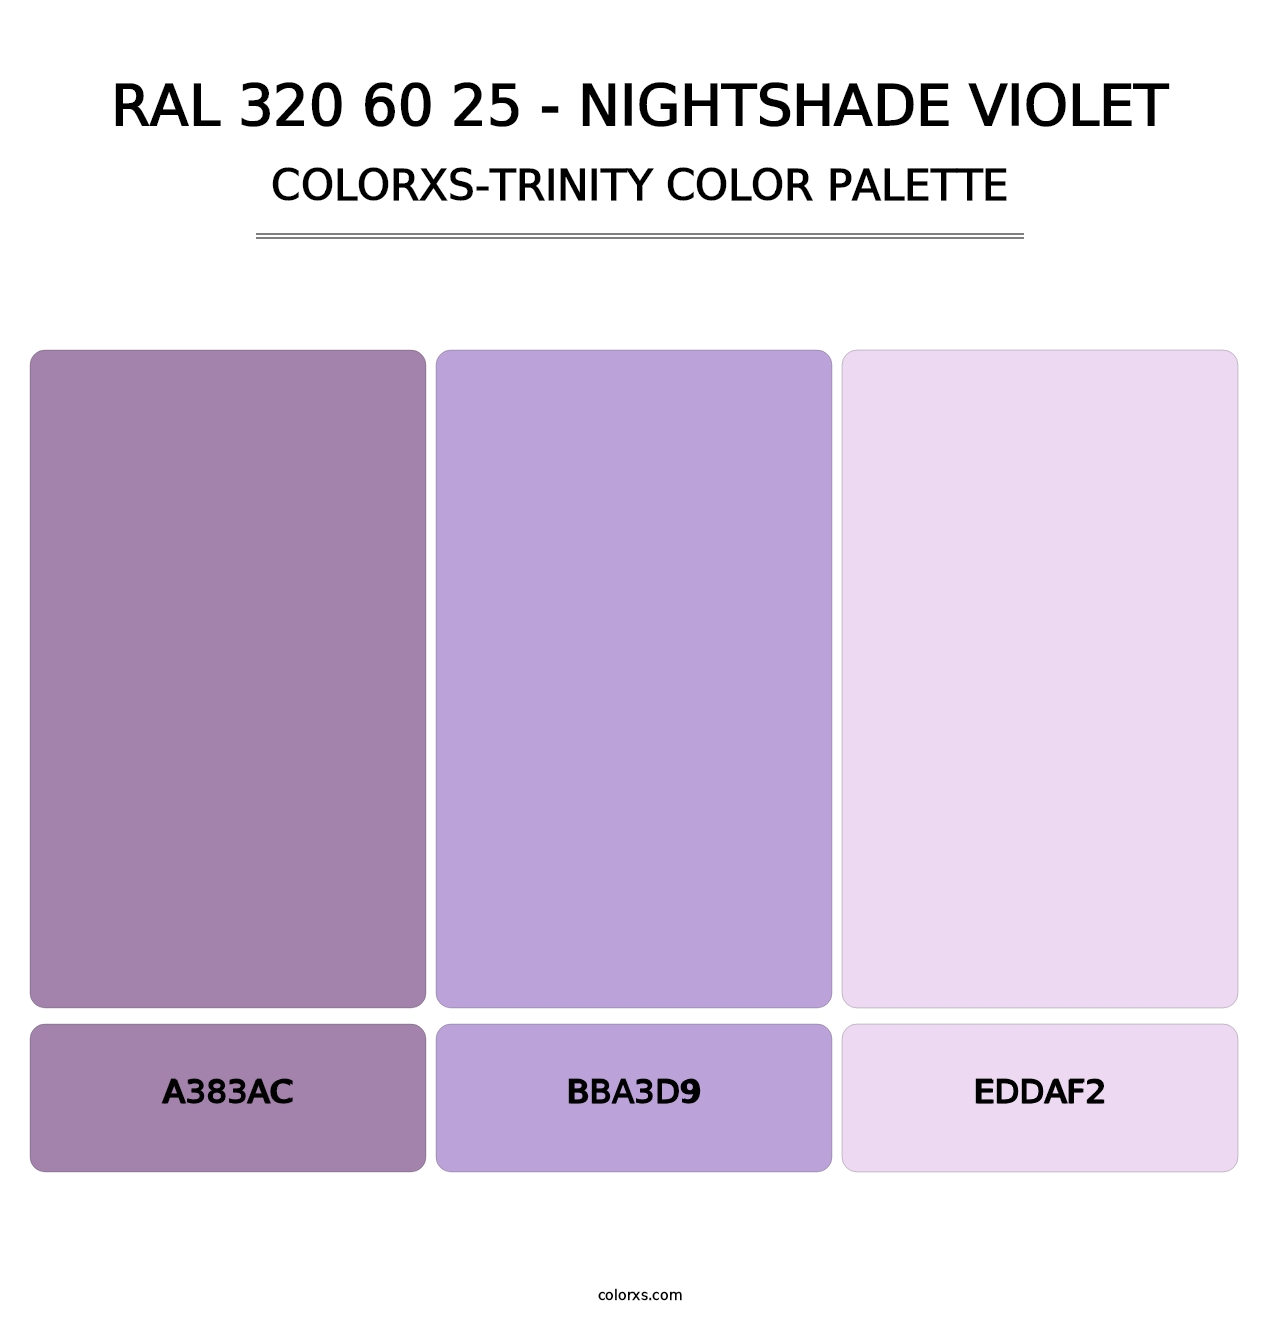 RAL 320 60 25 - Nightshade Violet - Colorxs Trinity Palette